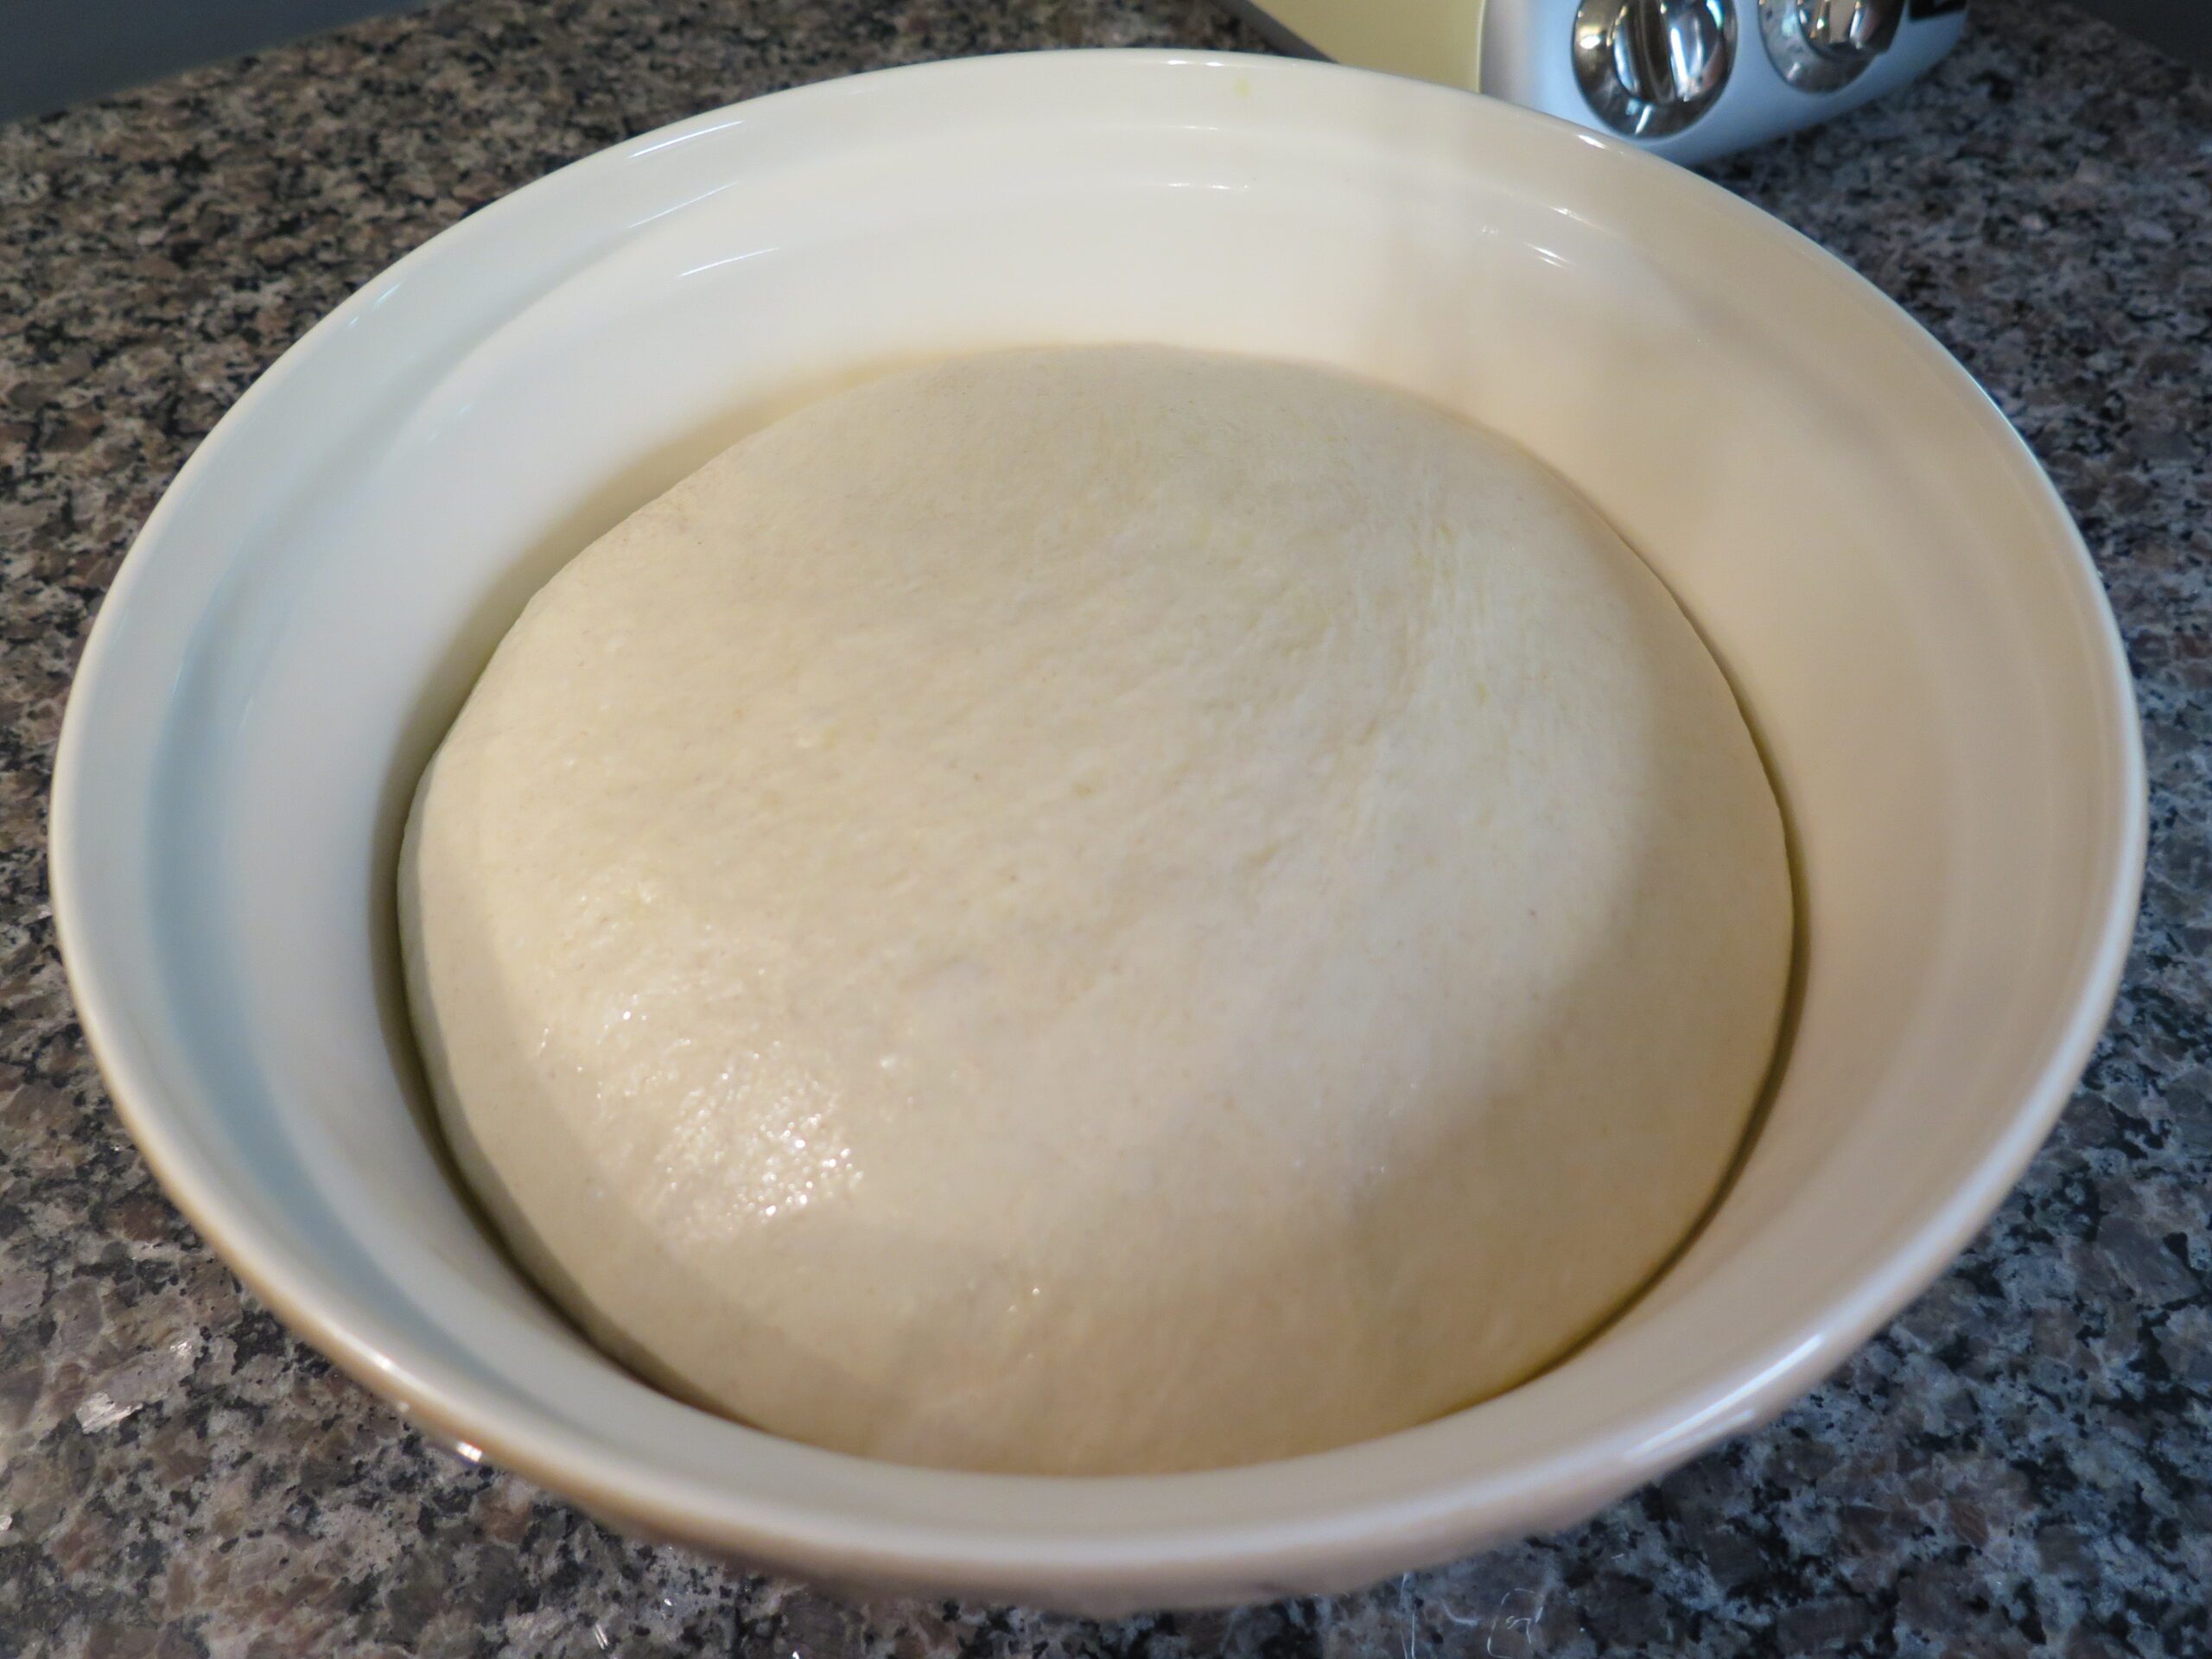 bread dough after 1 hour of proofing